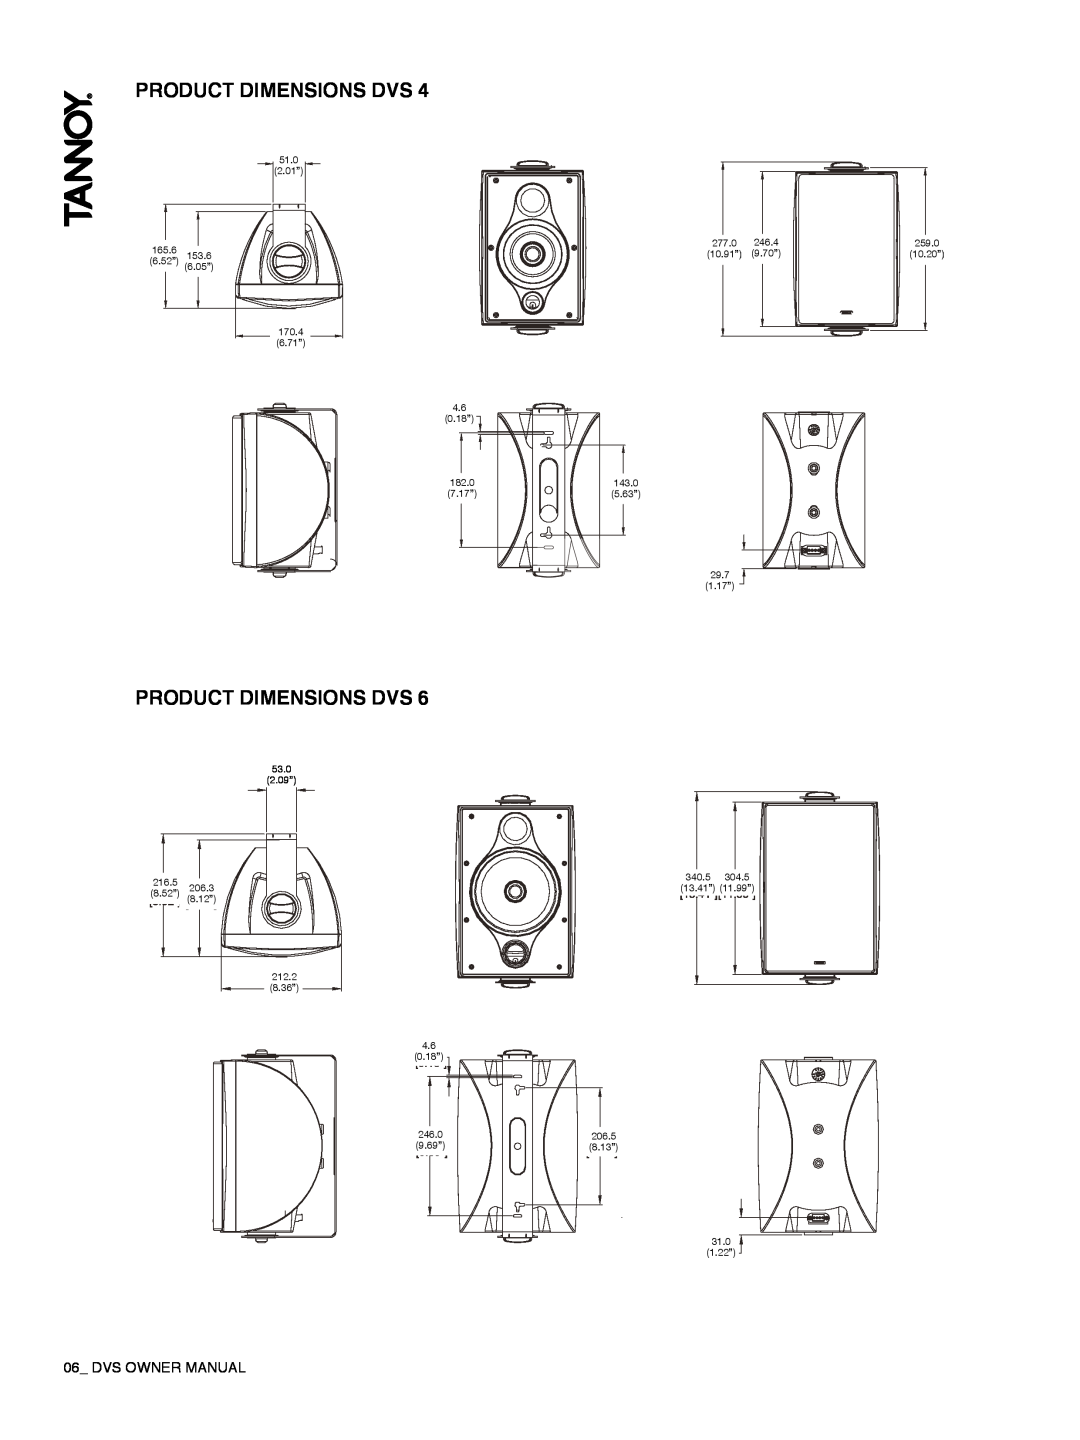 Tannoy DVS Series owner manual Product Dimensions Dvs 